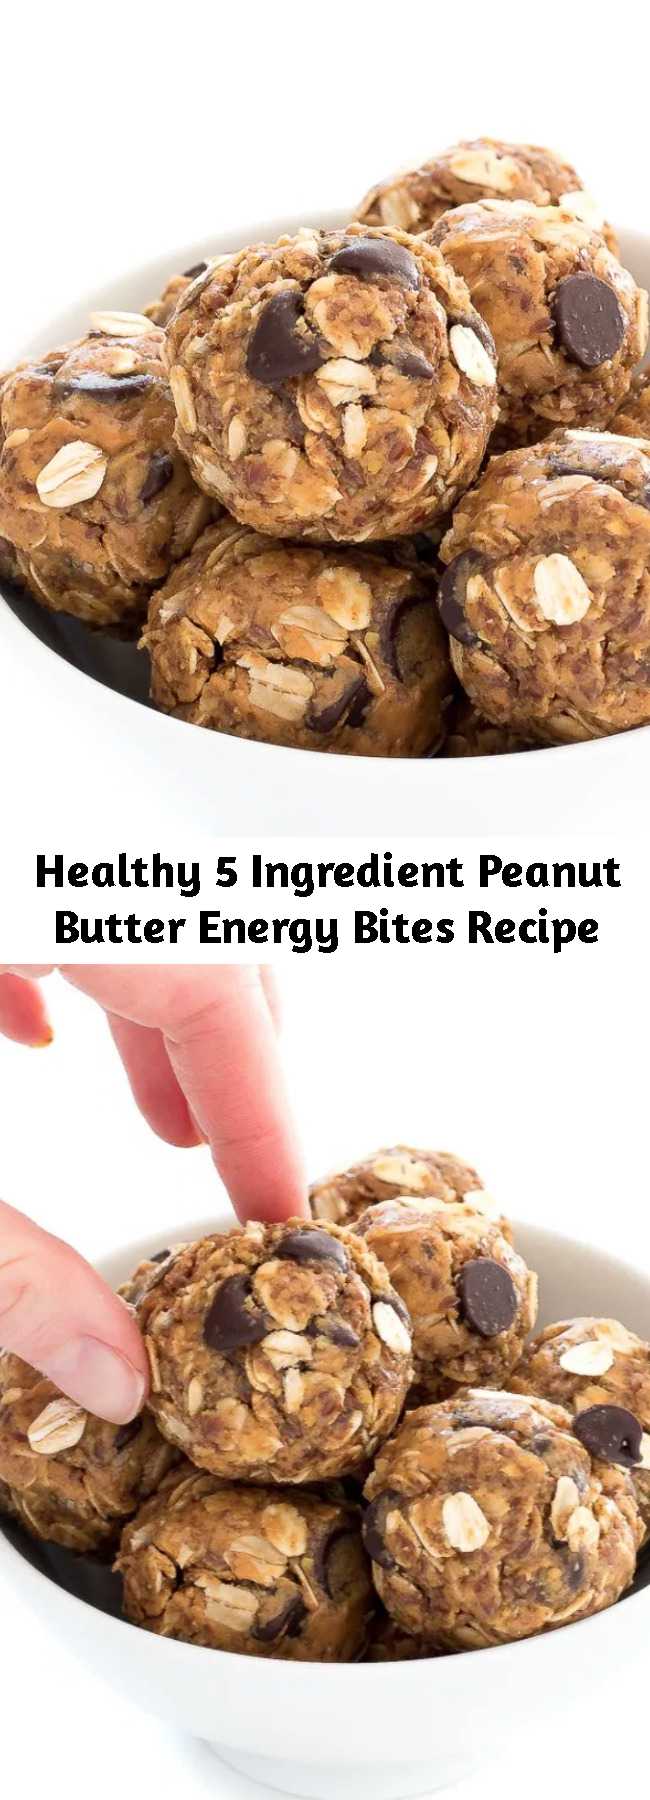 Healthy 5 Ingredient Peanut Butter Energy Bites Recipe - No Bake 5 Ingredient Peanut Butter Energy Bites. Loaded with old fashioned oats, peanut butter and flax seeds. A healthy protein packed breakfast or snack! #recipe #healthy #peanut #butter #energy #bites #snack #breakfast